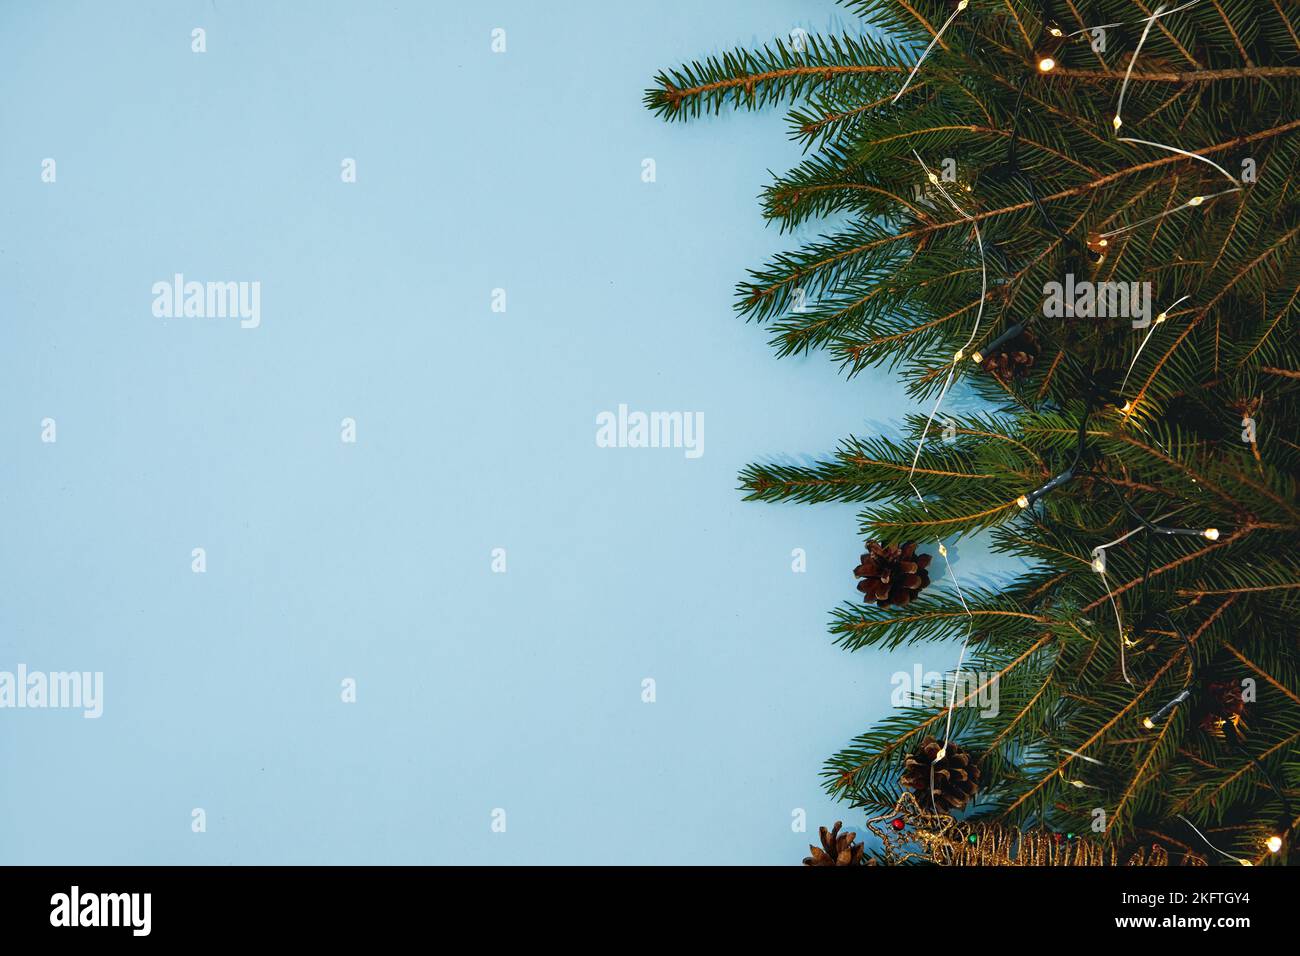 Layout made of Christmas tree branches on blue background. Nature New Year concept. Stock Photo